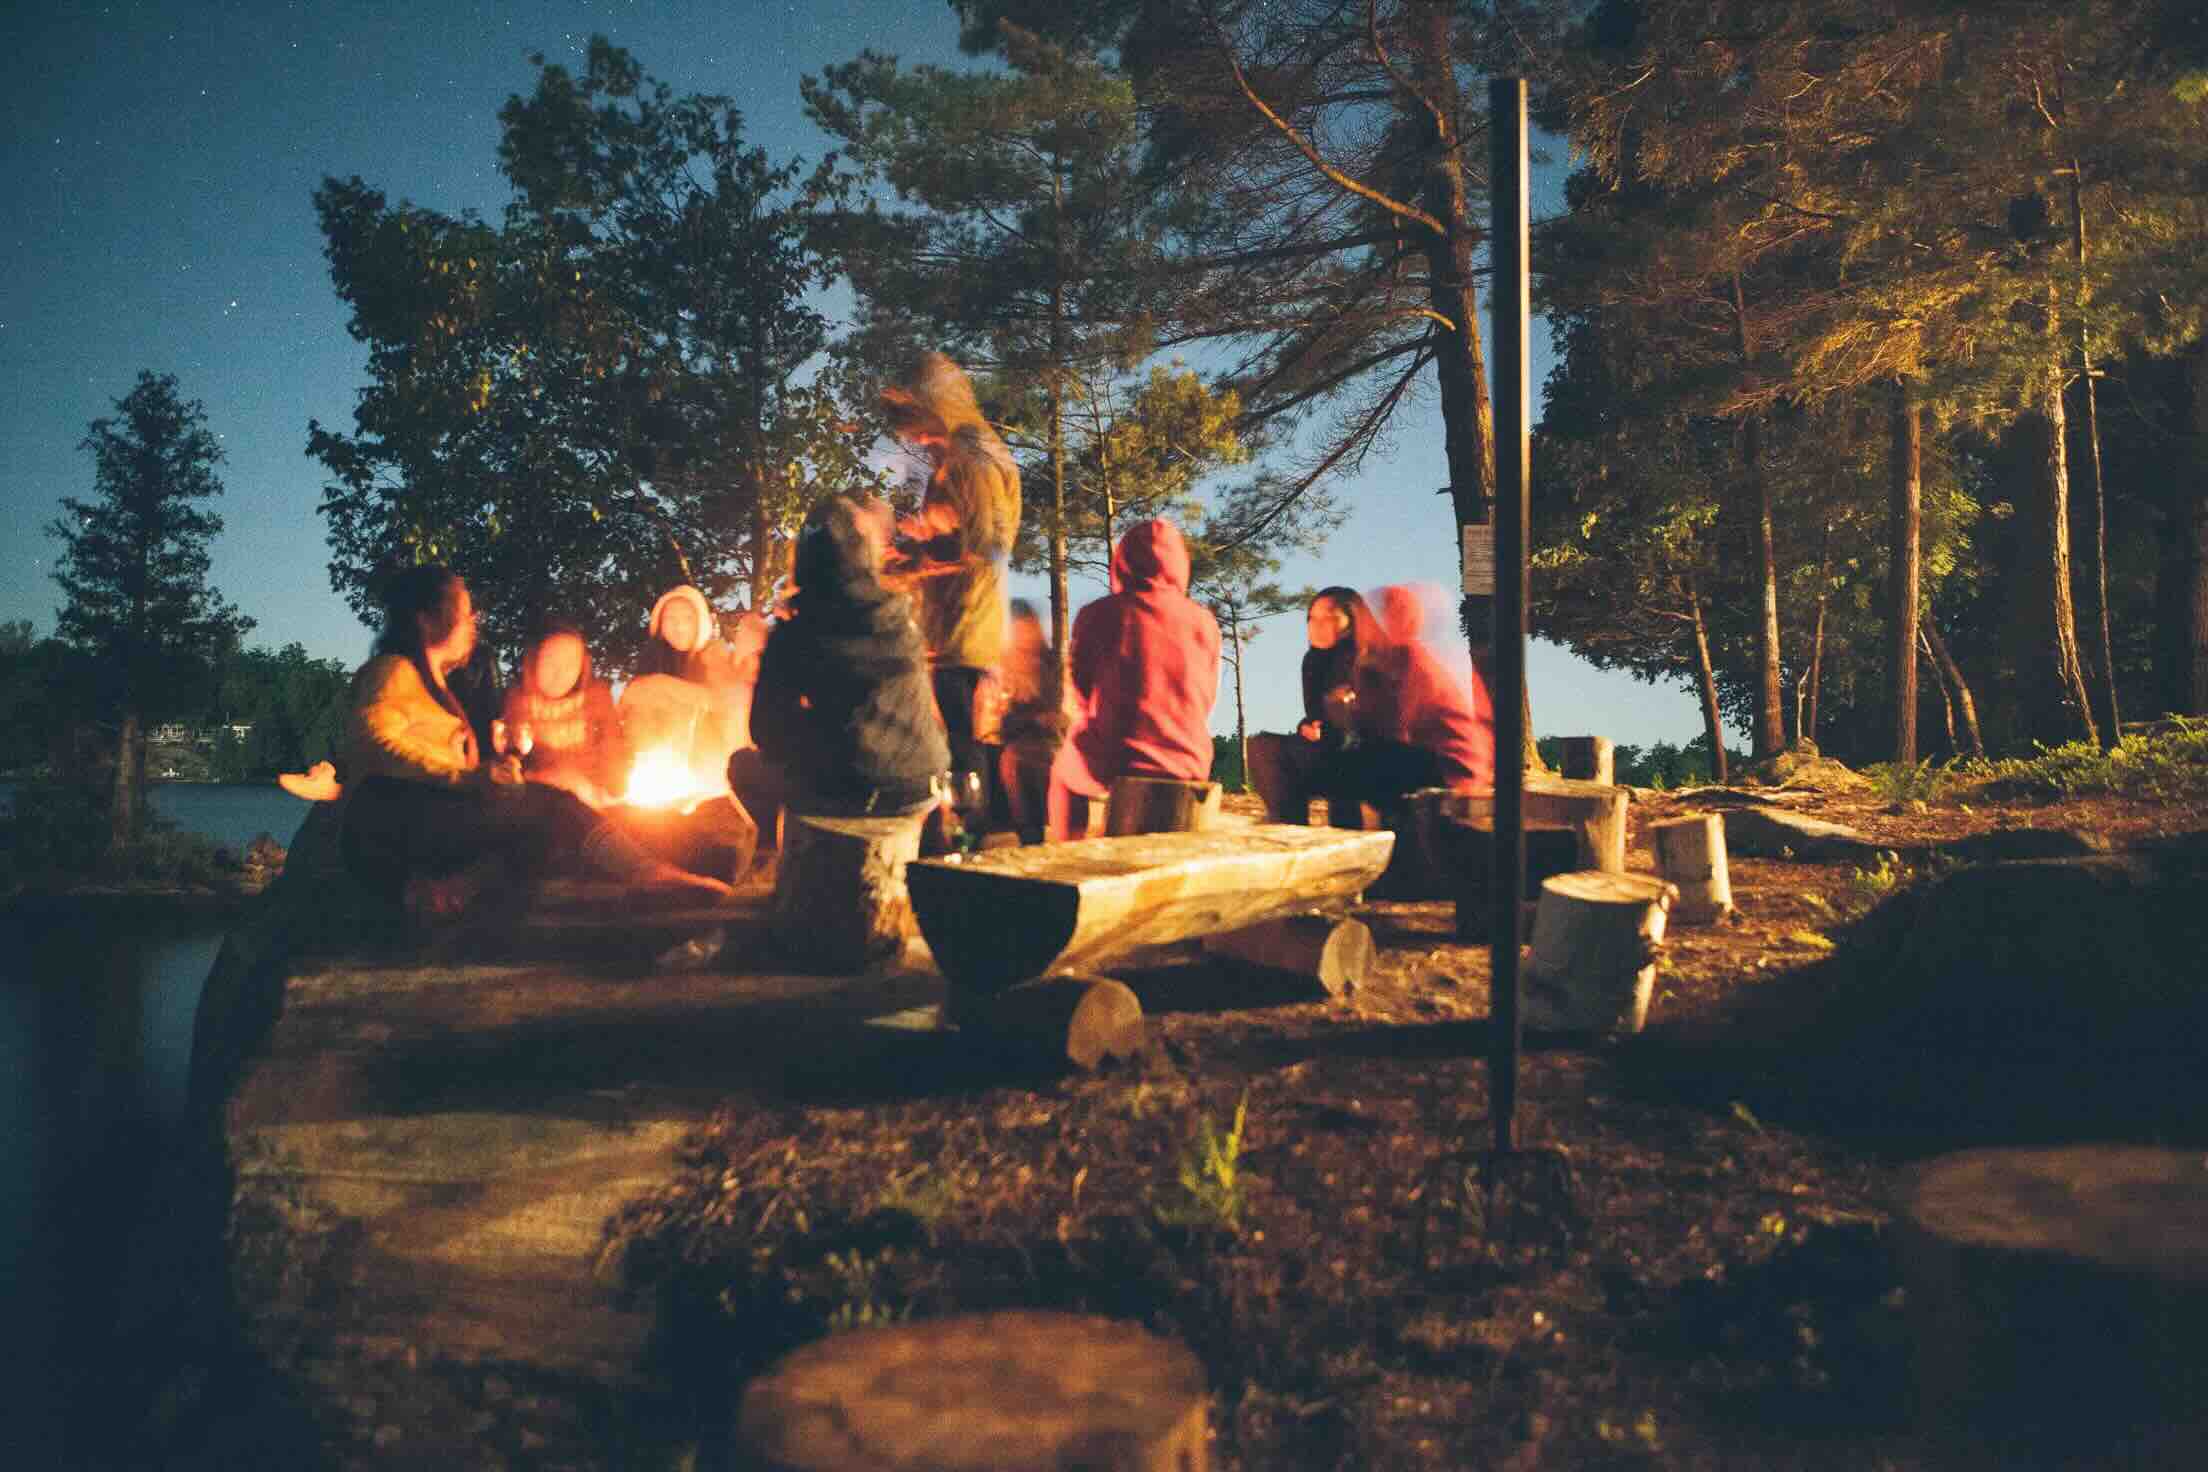 Plan a camping trip with friends and family.